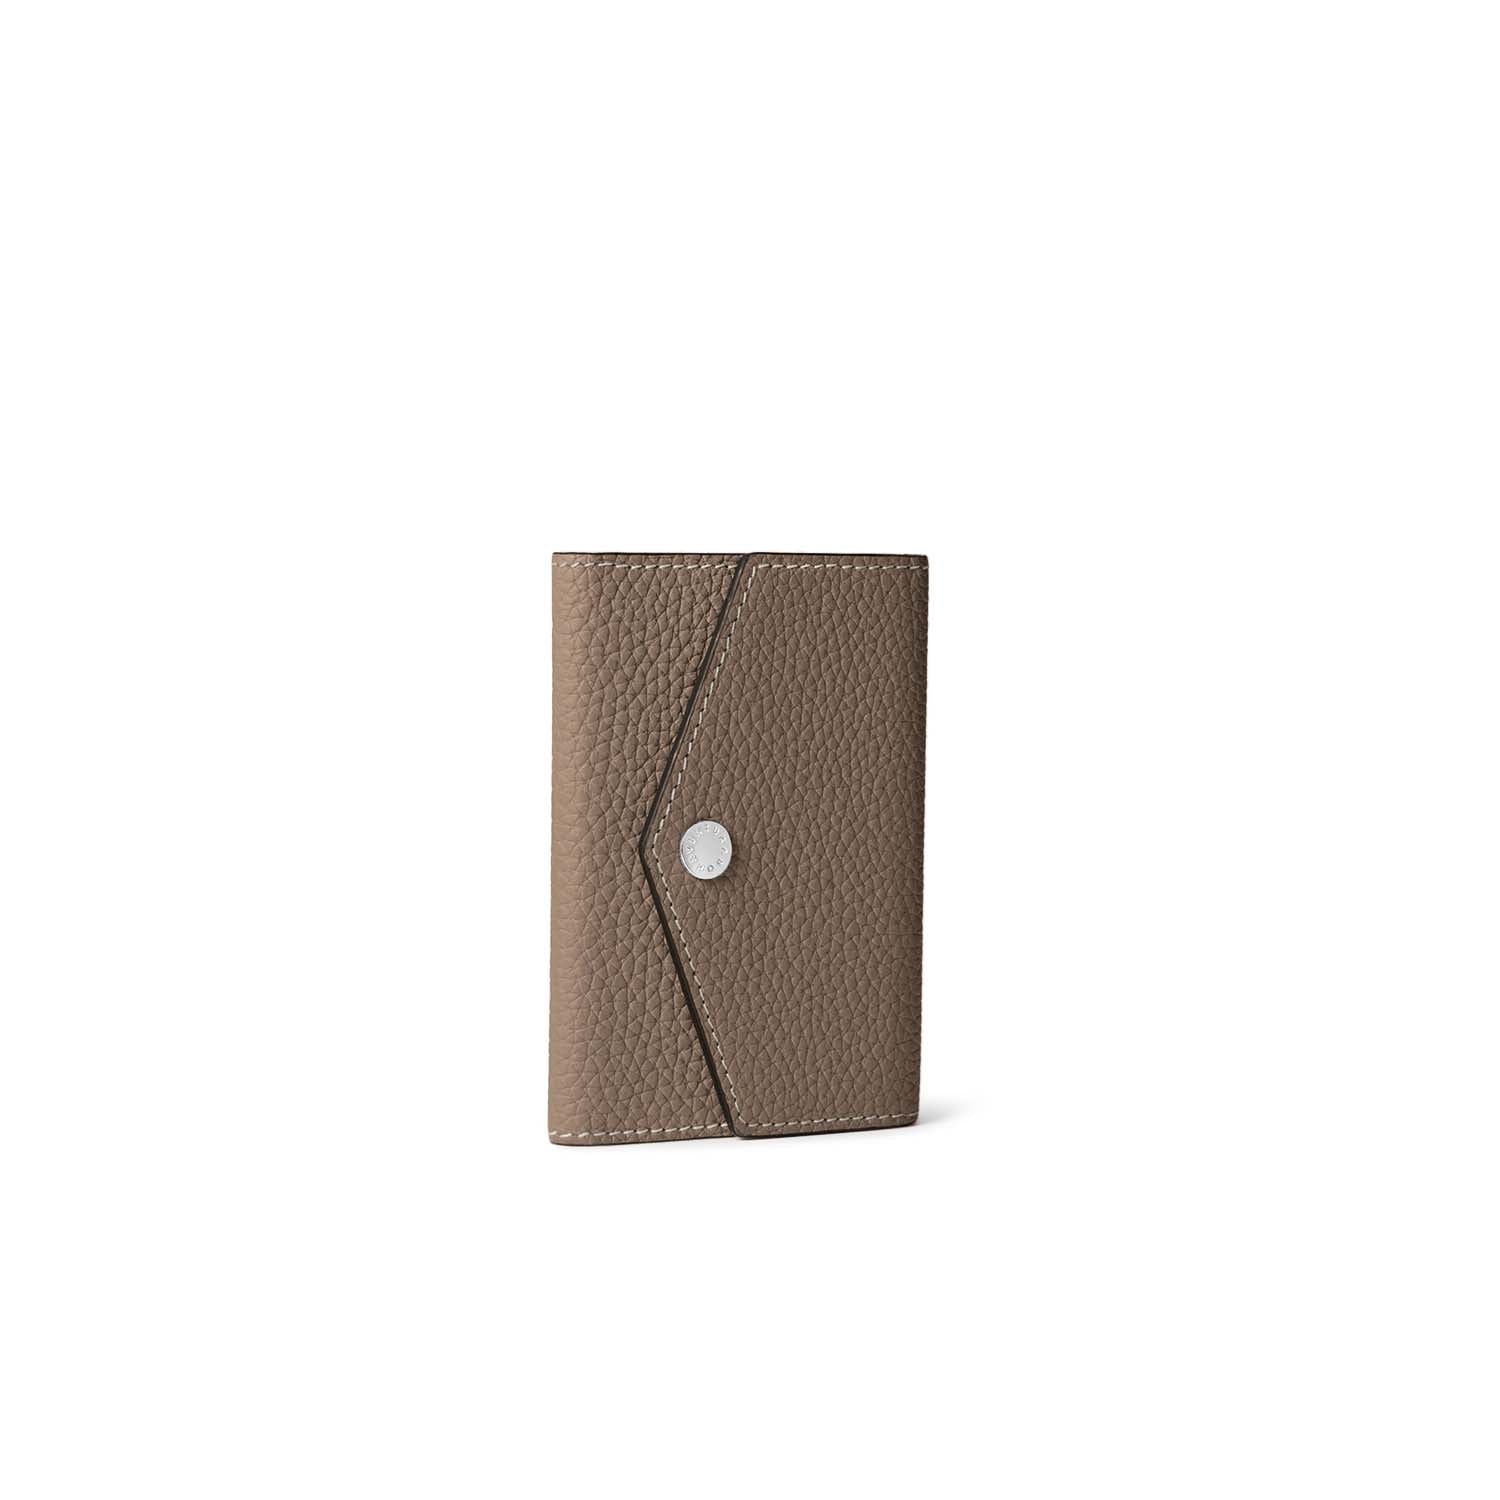 (Snap button back cover case) Mirror pouch in shrink leather